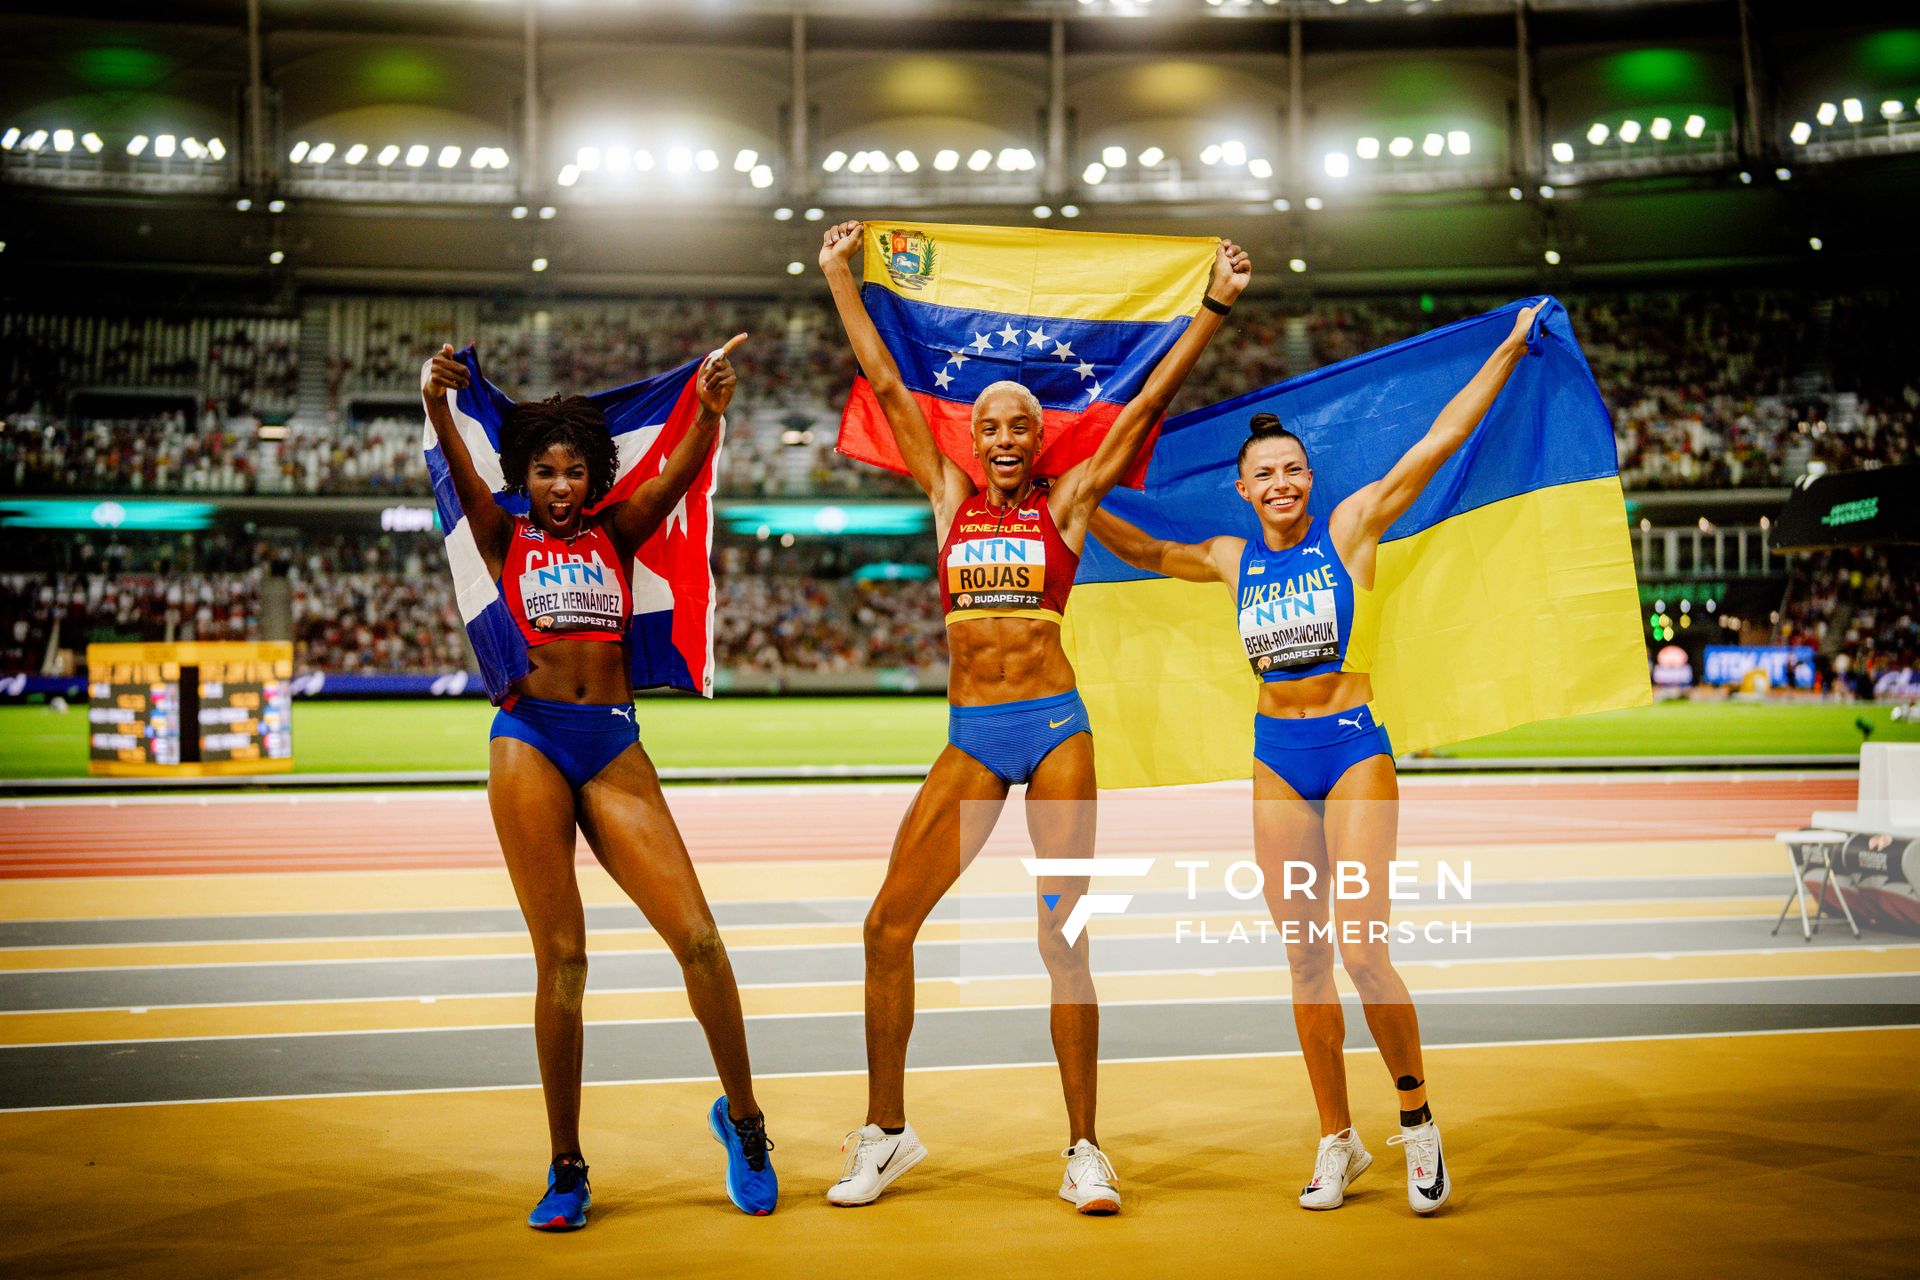 Leyanis Pérez hernández (CUB/Cuba), Yulimar Rojas (VEN/Venezuela), Maryna Bekh-romanchuk (UKR/Ukraine) during the Long Jump Final on Day 7 of the World Athletics Championships Budapest 23 at the National Athletics Centre in Budapest, Hungary on August 25, 2023.